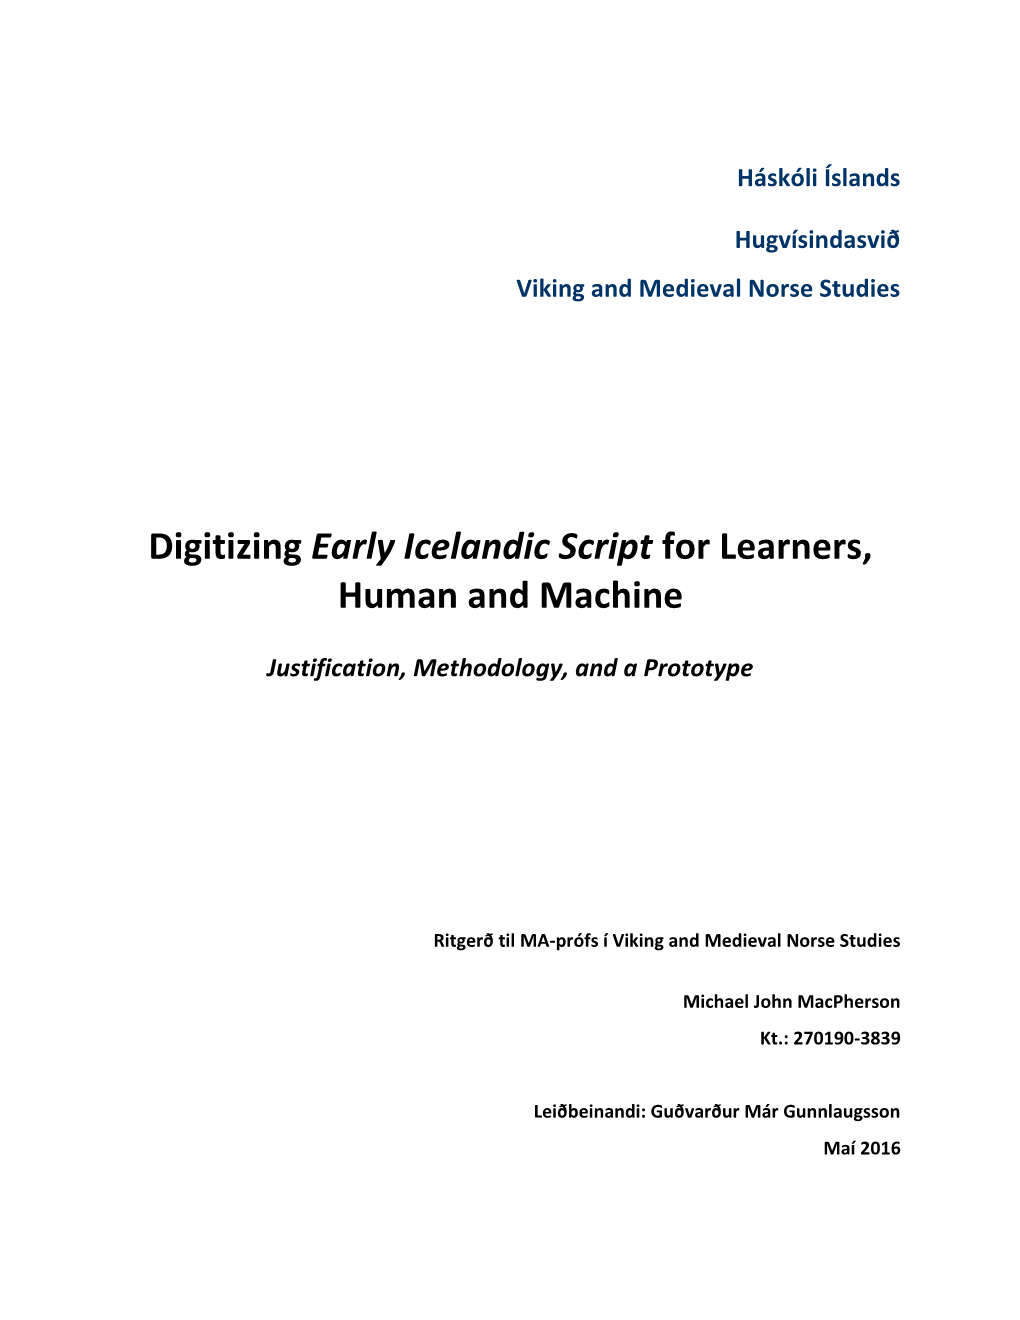 Digitizing Early Icelandic Script for Learners, Human and Machine